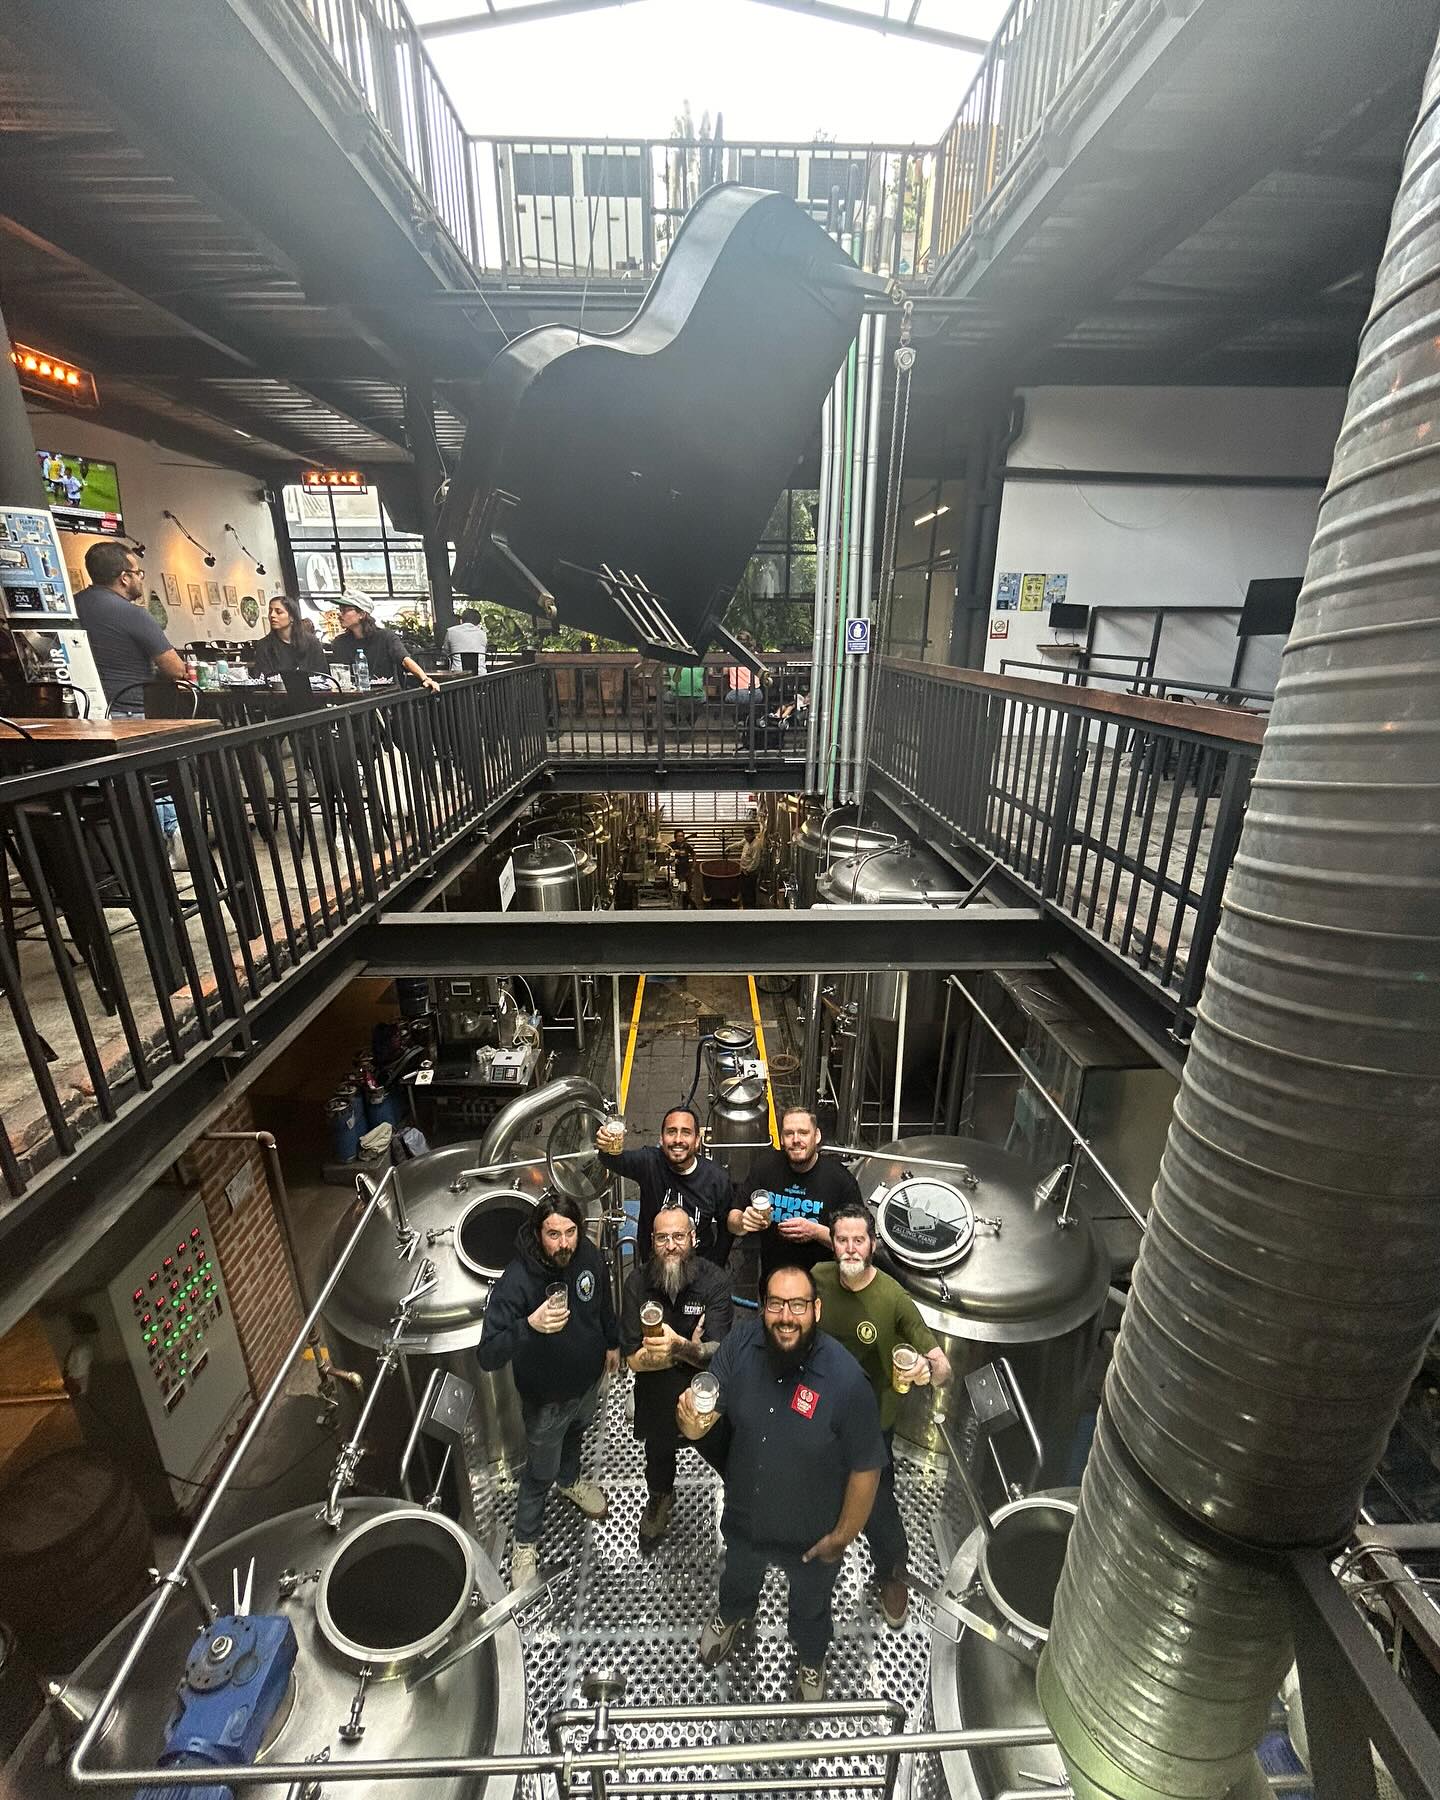 10bbl 4 vessel brewery equipment in Mexico--Falling Piano Beer Brewery